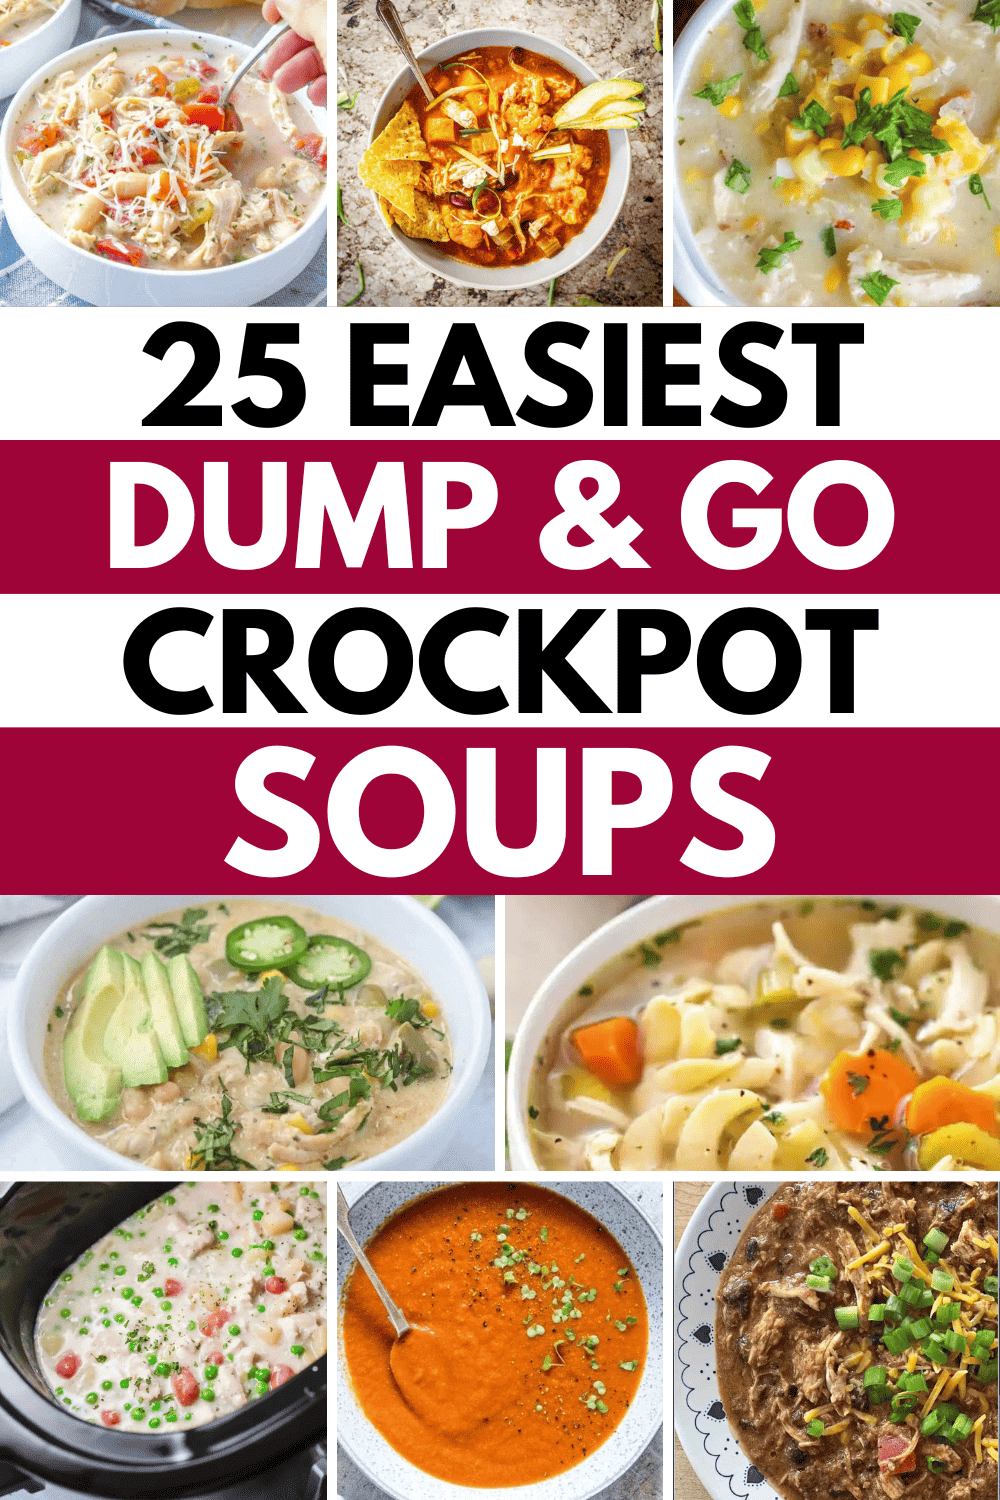 Quick and easy crockpot soup recipes! These easy dump crockpot soup recipes, easy crockpot soup recipes cold weather, dump recipes dinner crock pots, cold weather dinner ideas crockpot easy, easy crockpot recipes with few ingredients, easy crockpot soup recipes 5 ingredients, crockpot freezer dump meals easy recipes, best crockpot soup recipes ever, quick and easy dinner recipes for two simple weeknight meals, slow cooker soup recipes easy simple, easy lasagna soup recipe crockpot, simple soup.